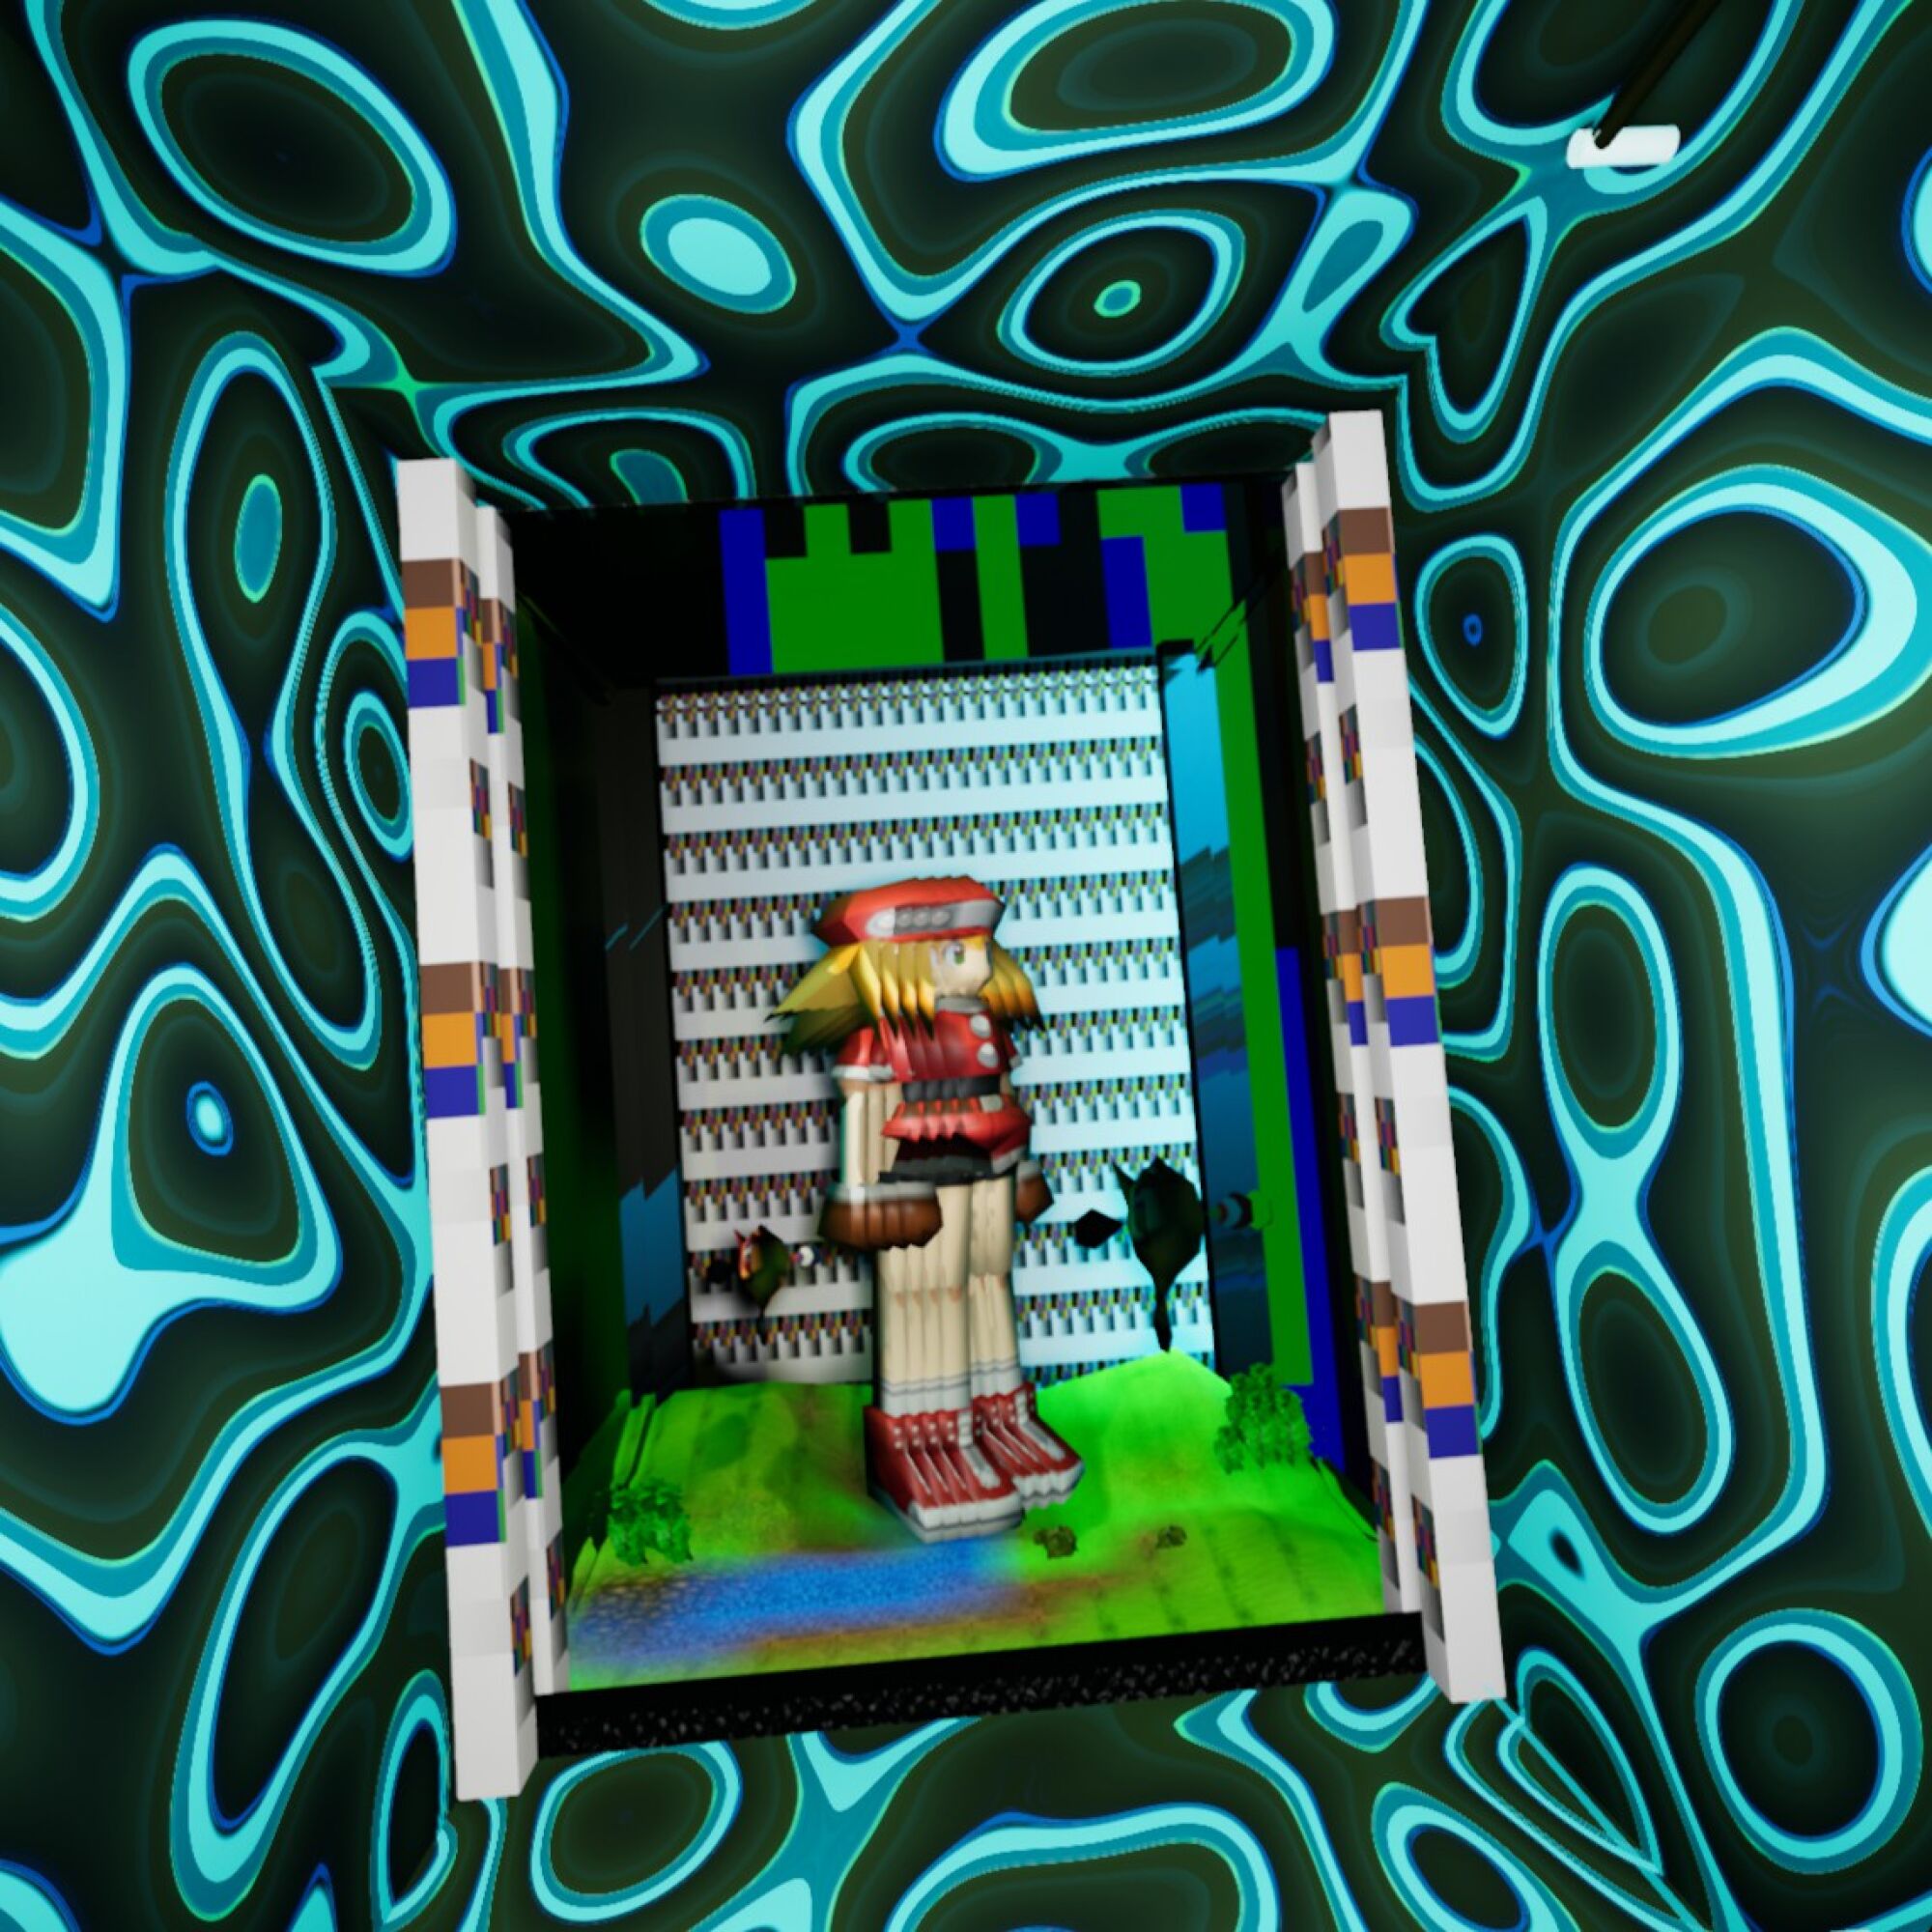 A still from artist Keith Tolch's interactive, virtual reality artwork, "Glass Bottom Brain."